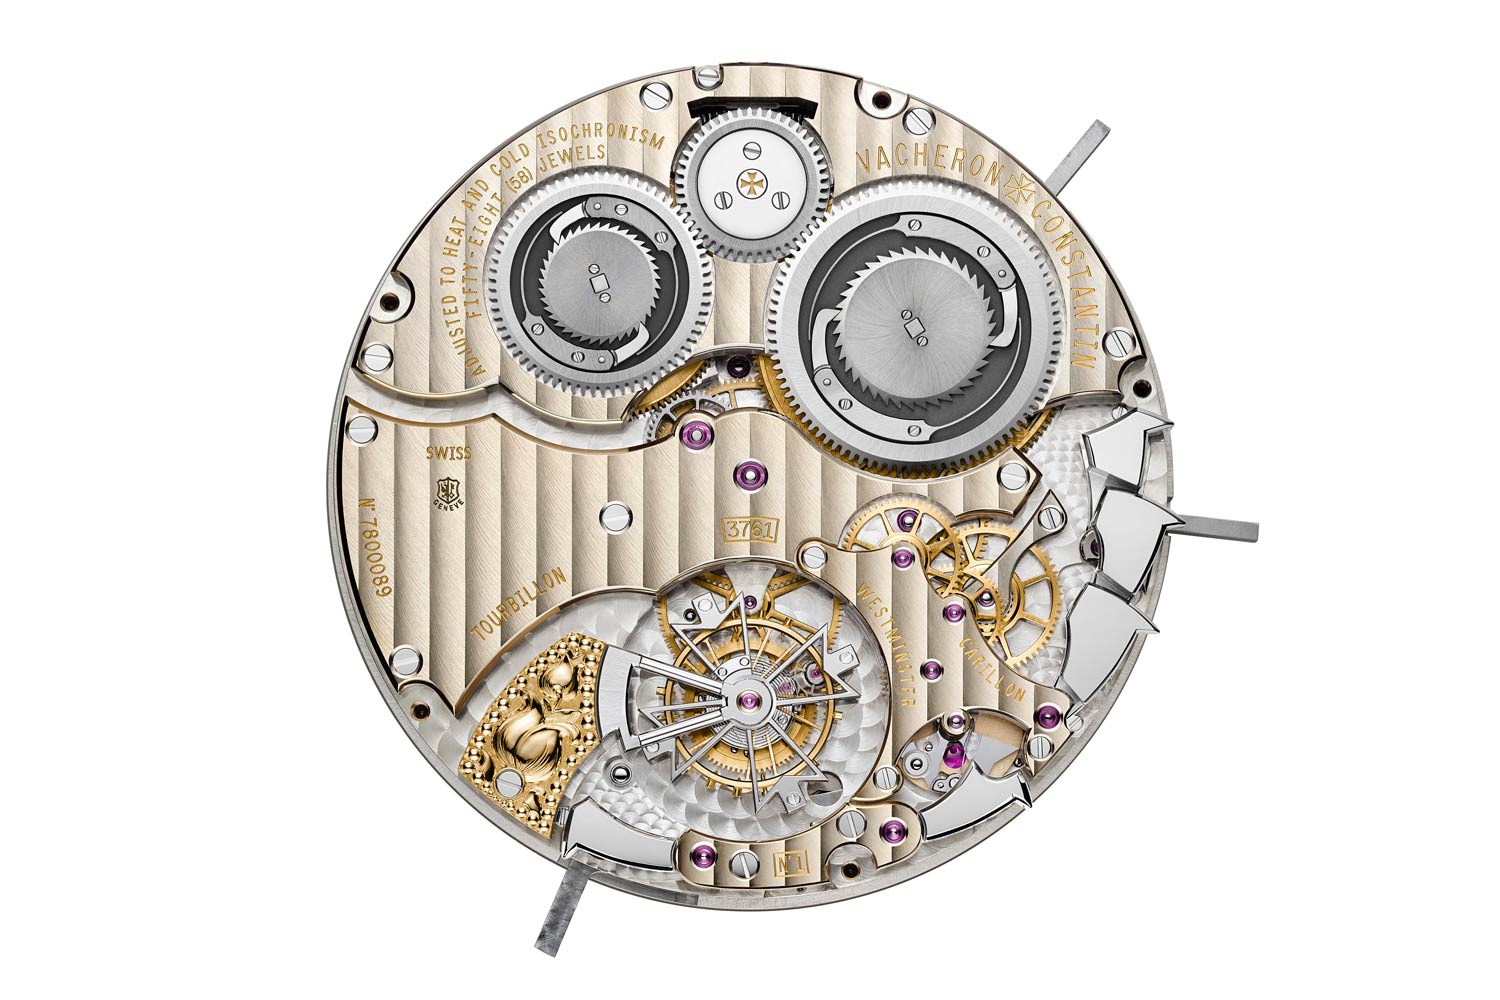 Vacheron Constantin has paid particular attention to the sequencing of the melodies and the clarity of sound with the help of the four rack and snail solution. Even the gongs for this pocket watch have been especially designed and tested several times before being cased up for that perfect acoustic experience.